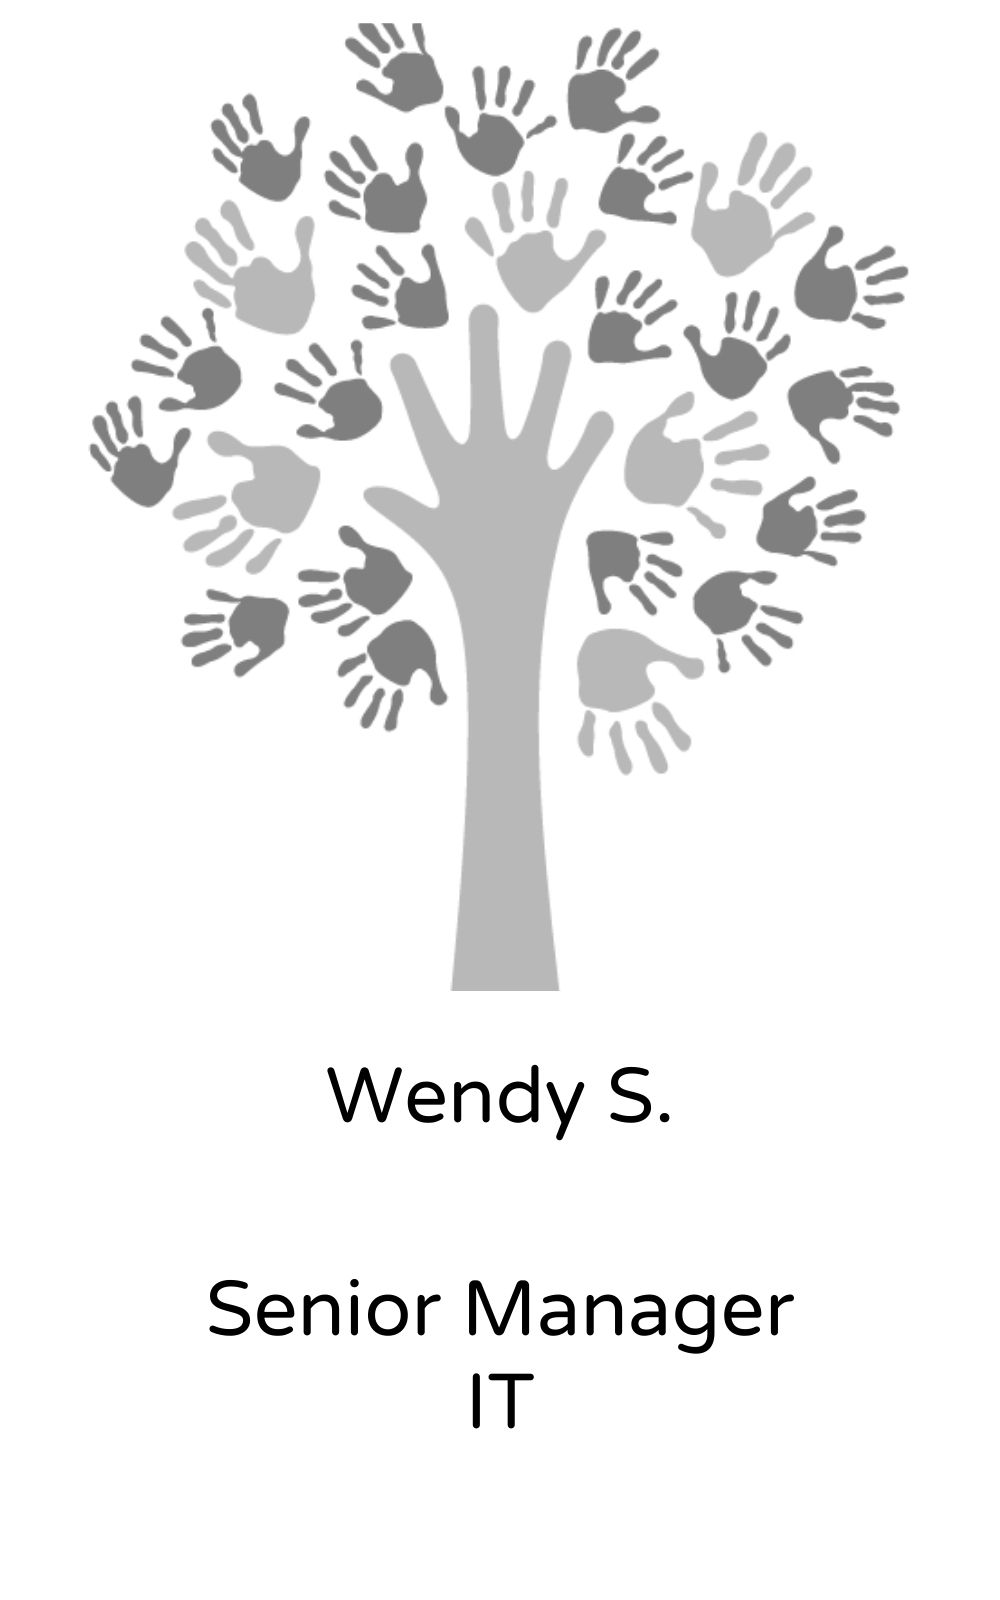 Wendy S, Senior Manager, IT